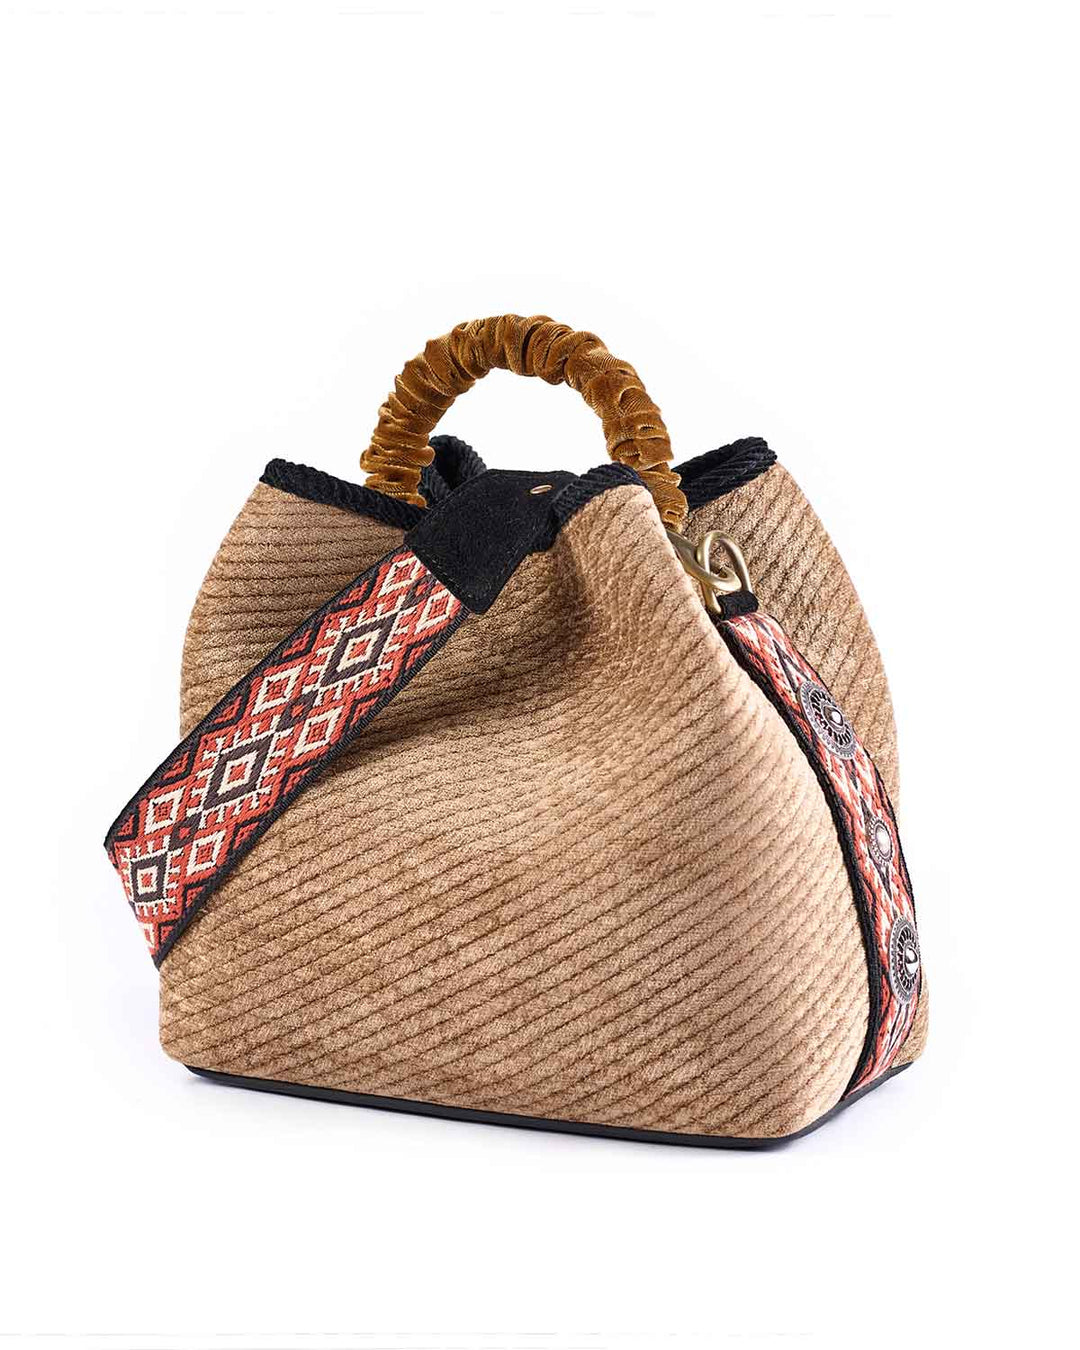 Handcrafted woven bag with patterned strap and cushioned handle